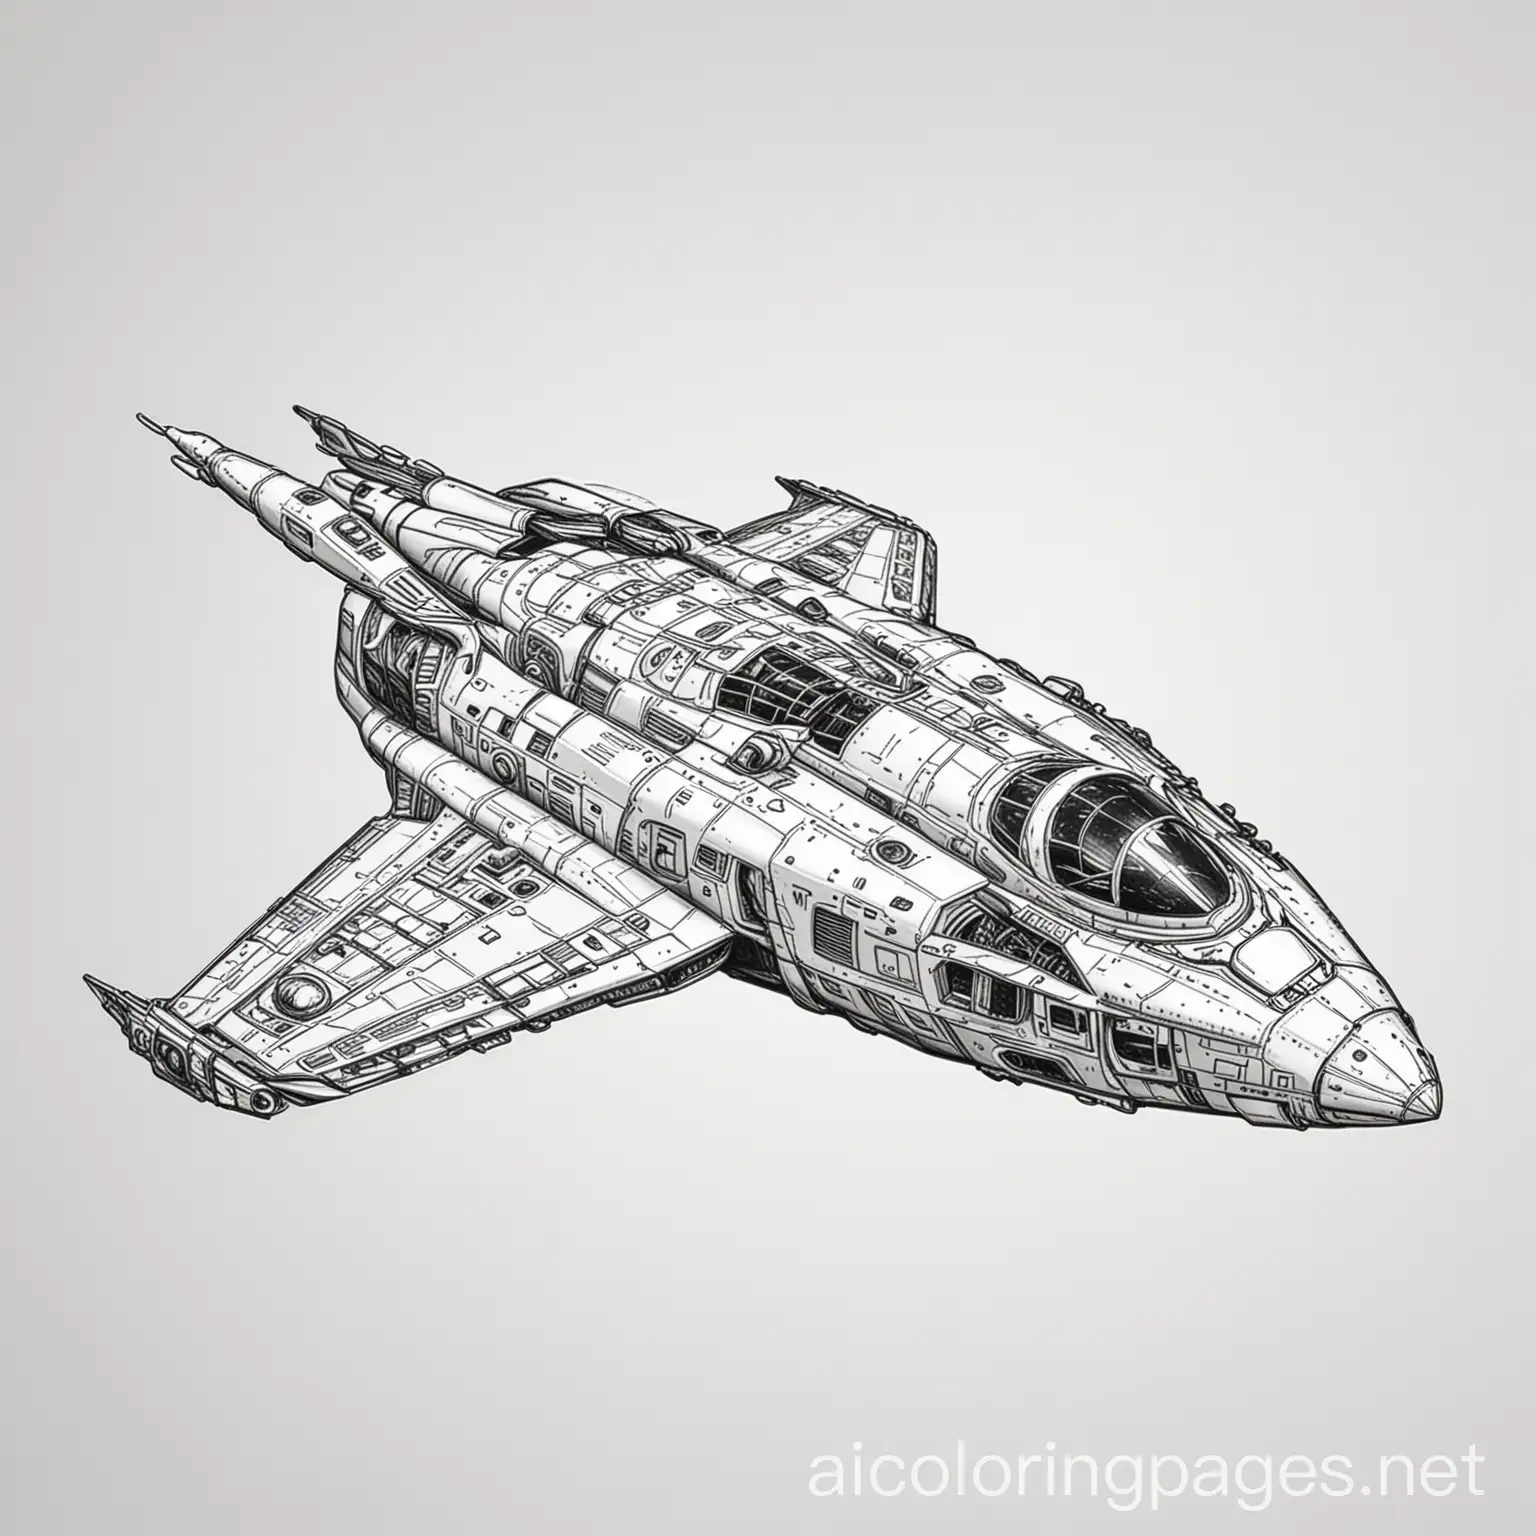 Spacecraft-Coloring-Page-Minimalistic-Black-and-White-Illustration-on-White-Background